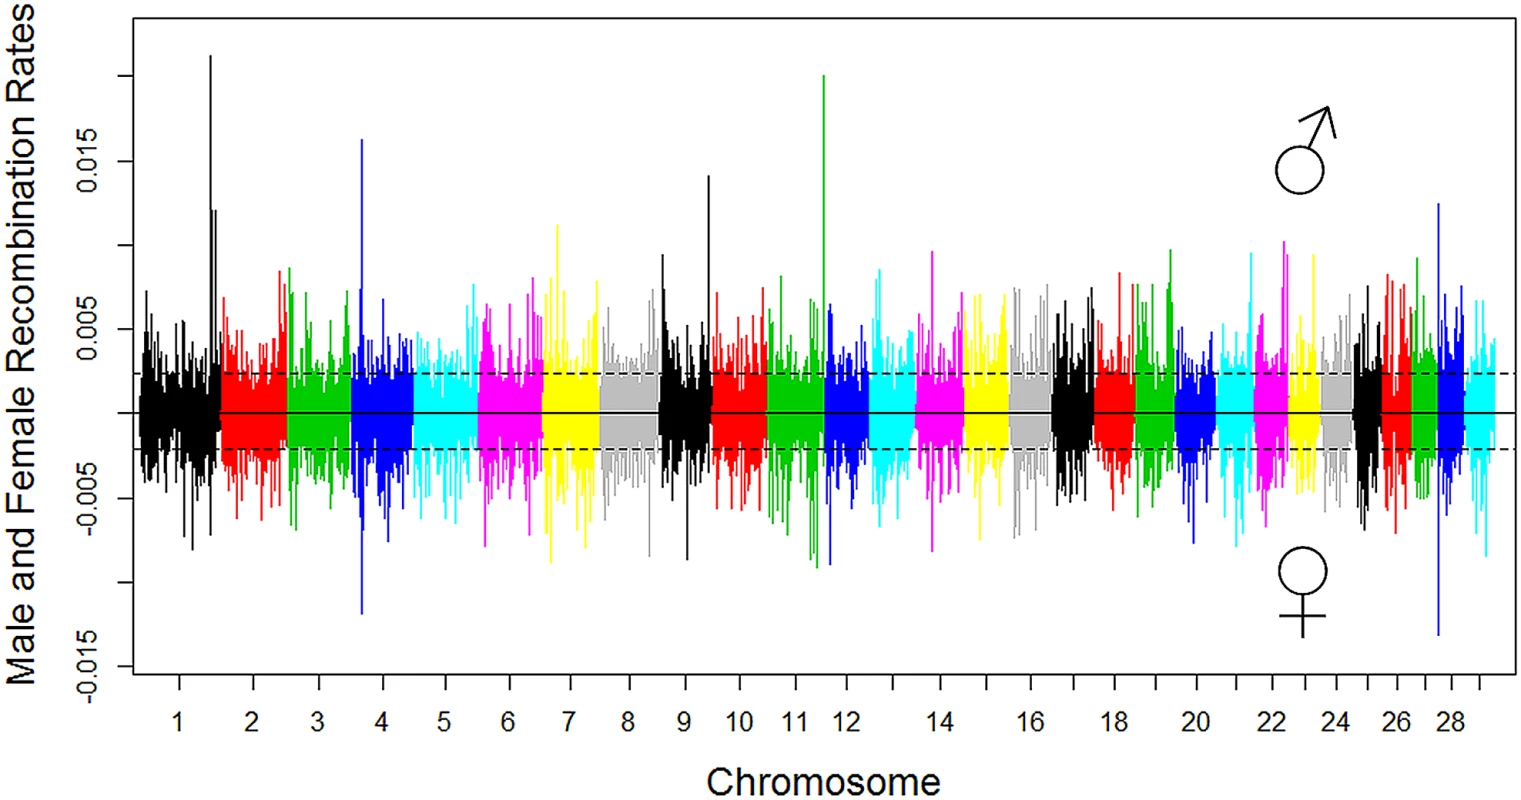 Genome-wide distribution of male and female recombination rates in SNP intervals of each chromosome.